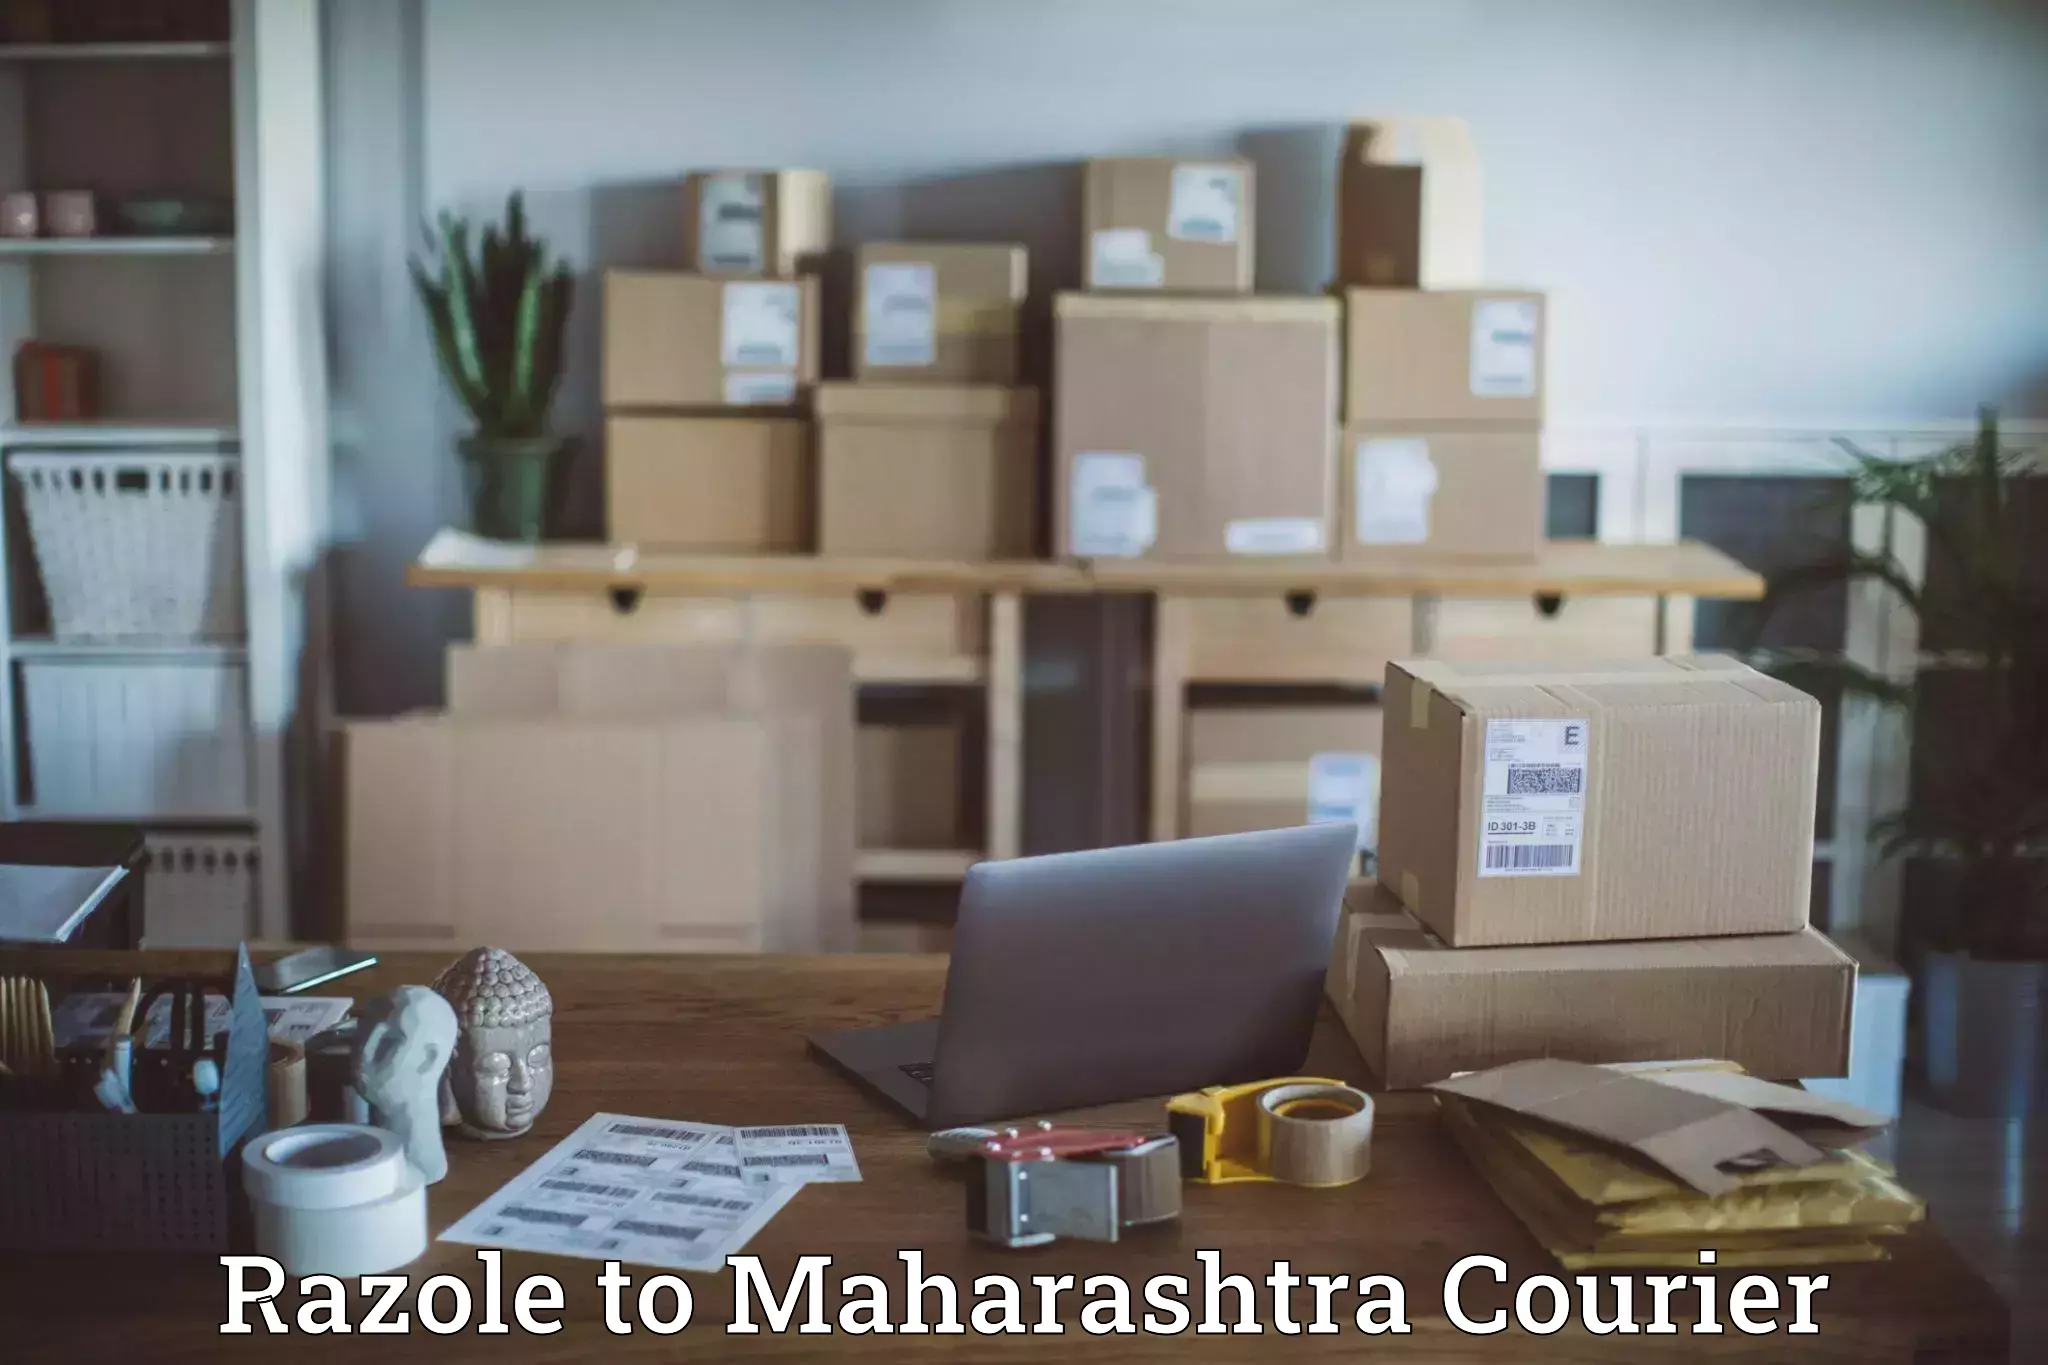 State-of-the-art courier technology Razole to Maharashtra